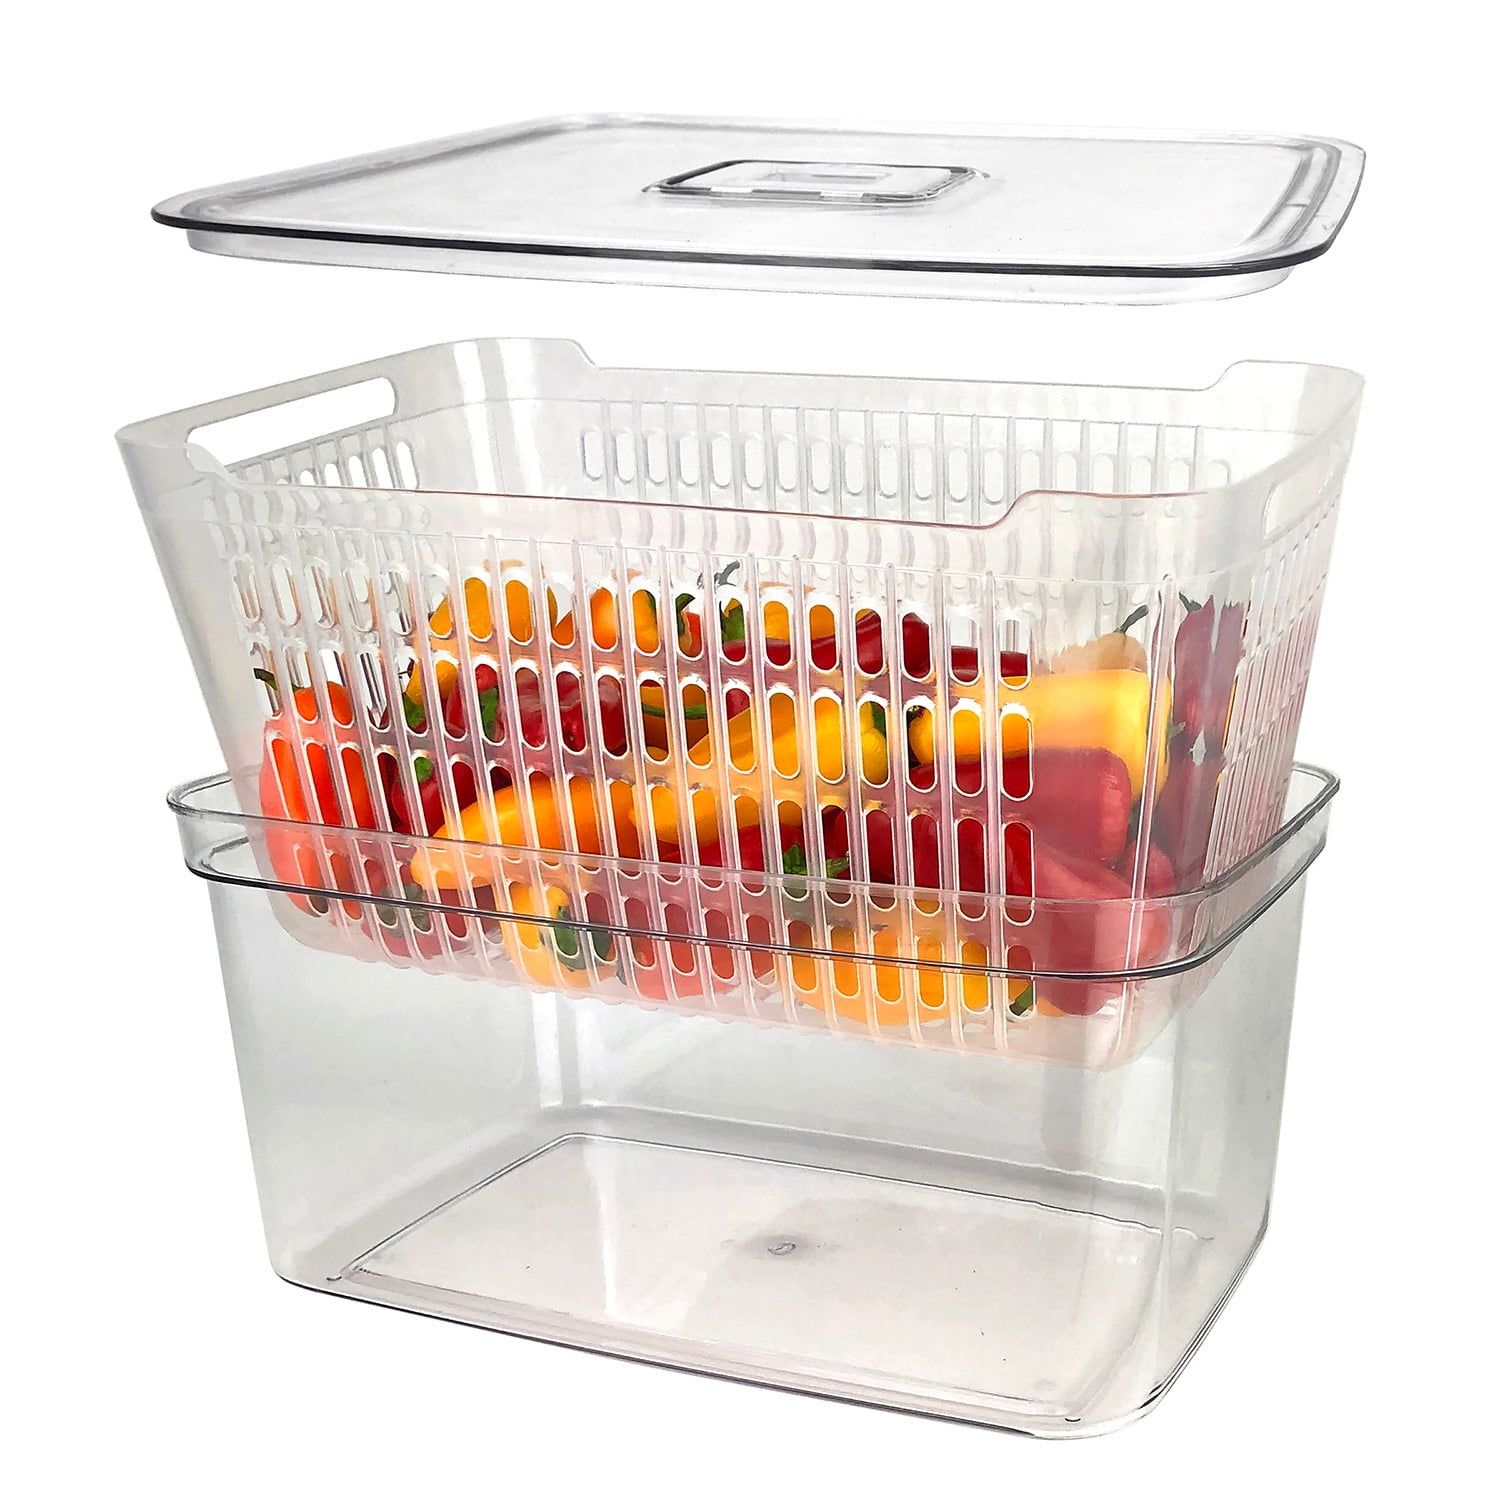 Spigo Eco Home Plastic Produce keeper With Removeable Vented Lid And  Basket, 8.25x6x4 Inches